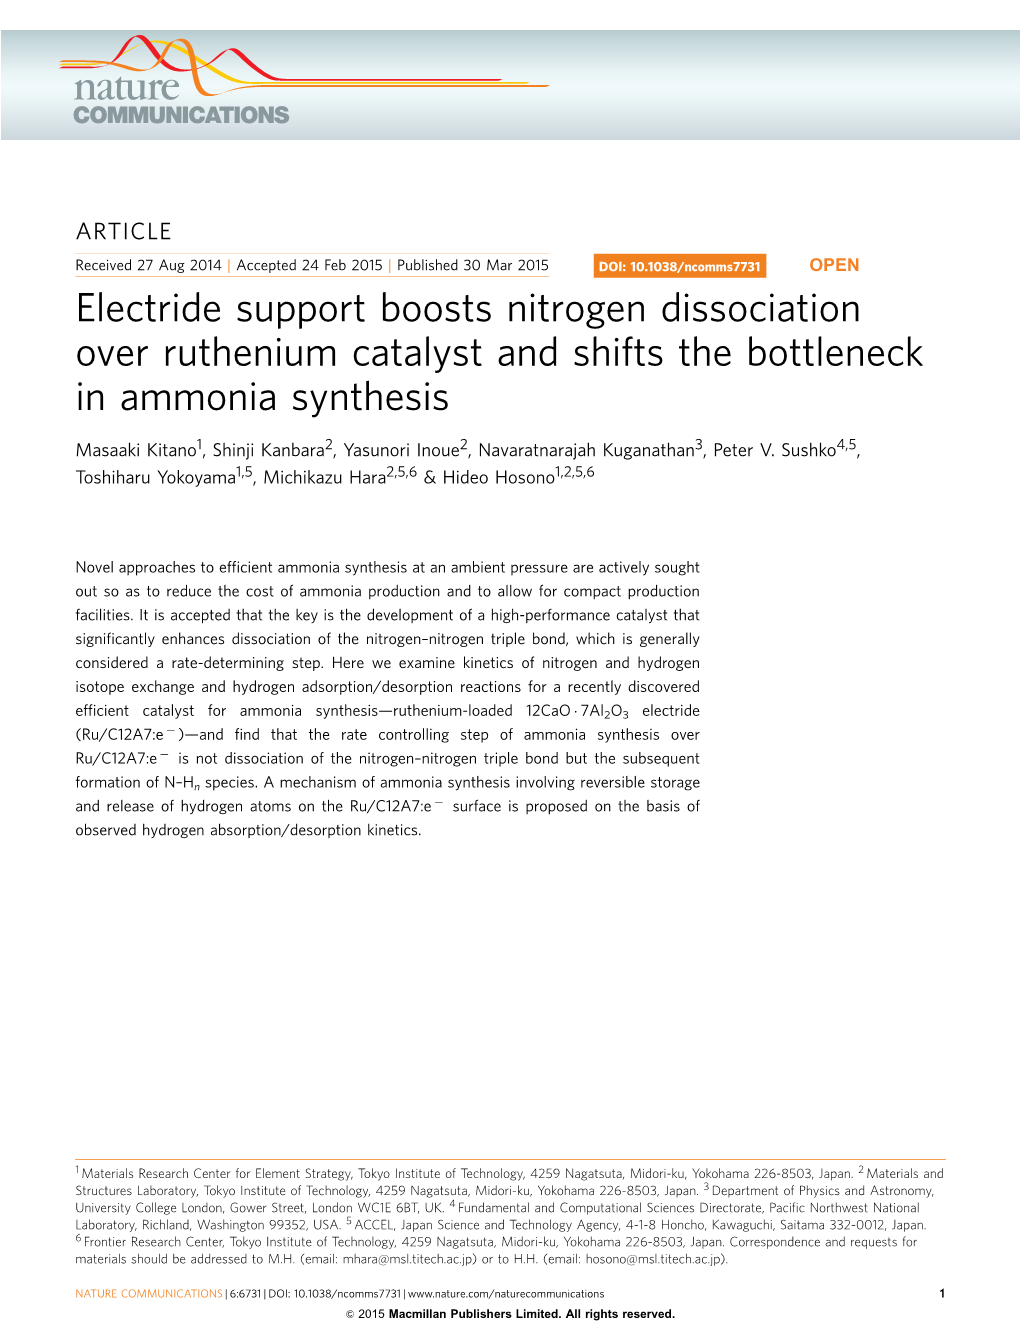 Electride Support Boosts Nitrogen Dissociation Over Ruthenium Catalyst and Shifts the Bottleneck in Ammonia Synthesis